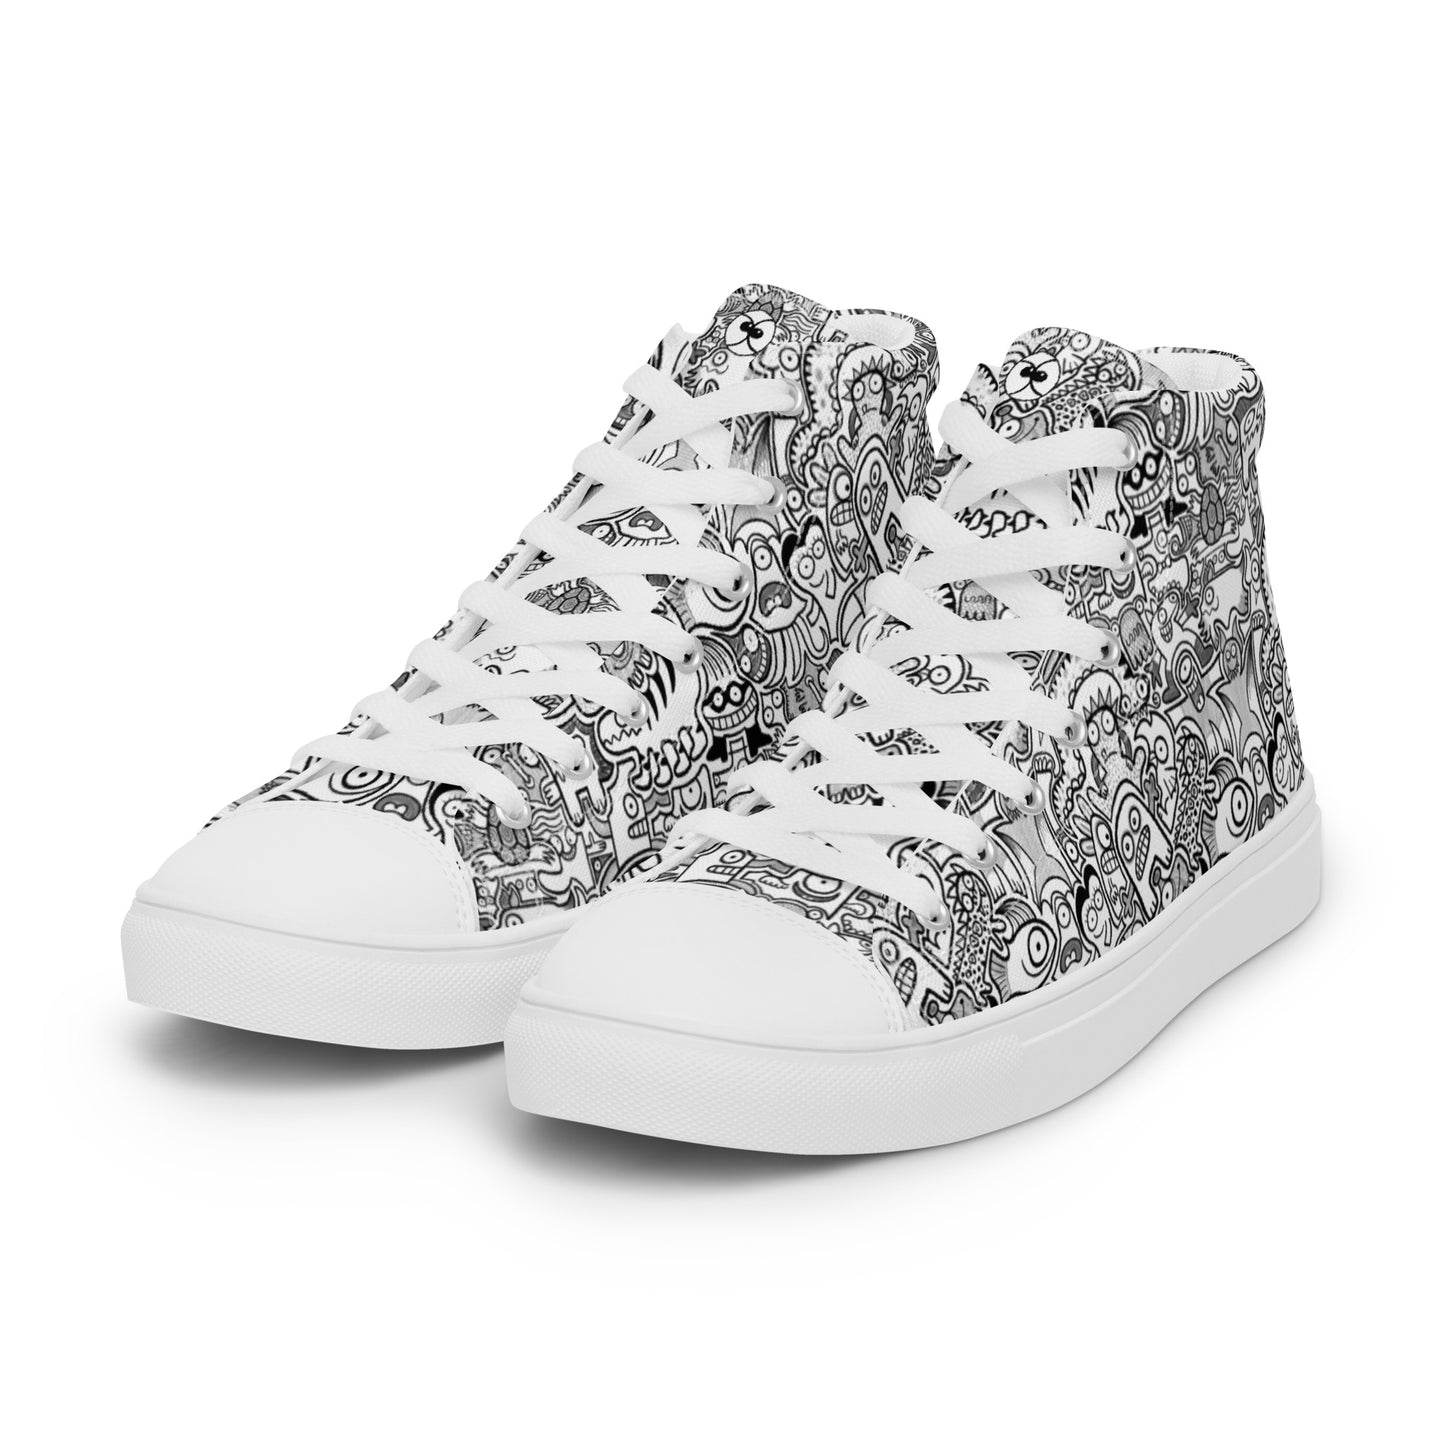 Fill your world with cool doodles Men’s high top canvas shoes. Overview